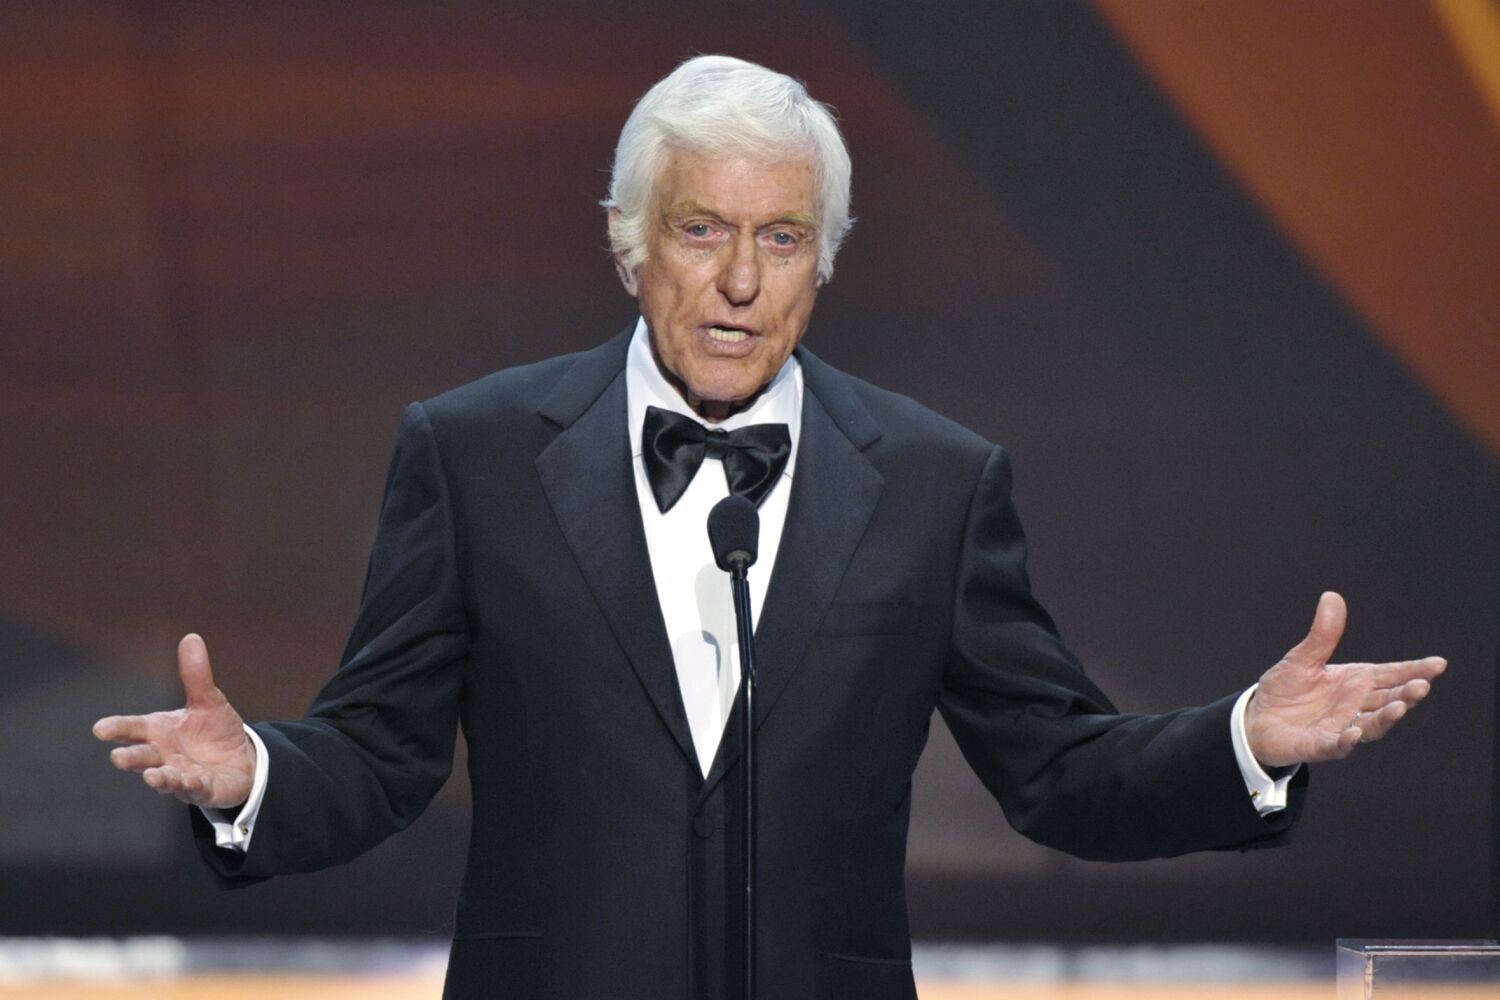 Dick Van Dyke says he's 'pretty good' but 'sore all over' after Malibu car accident